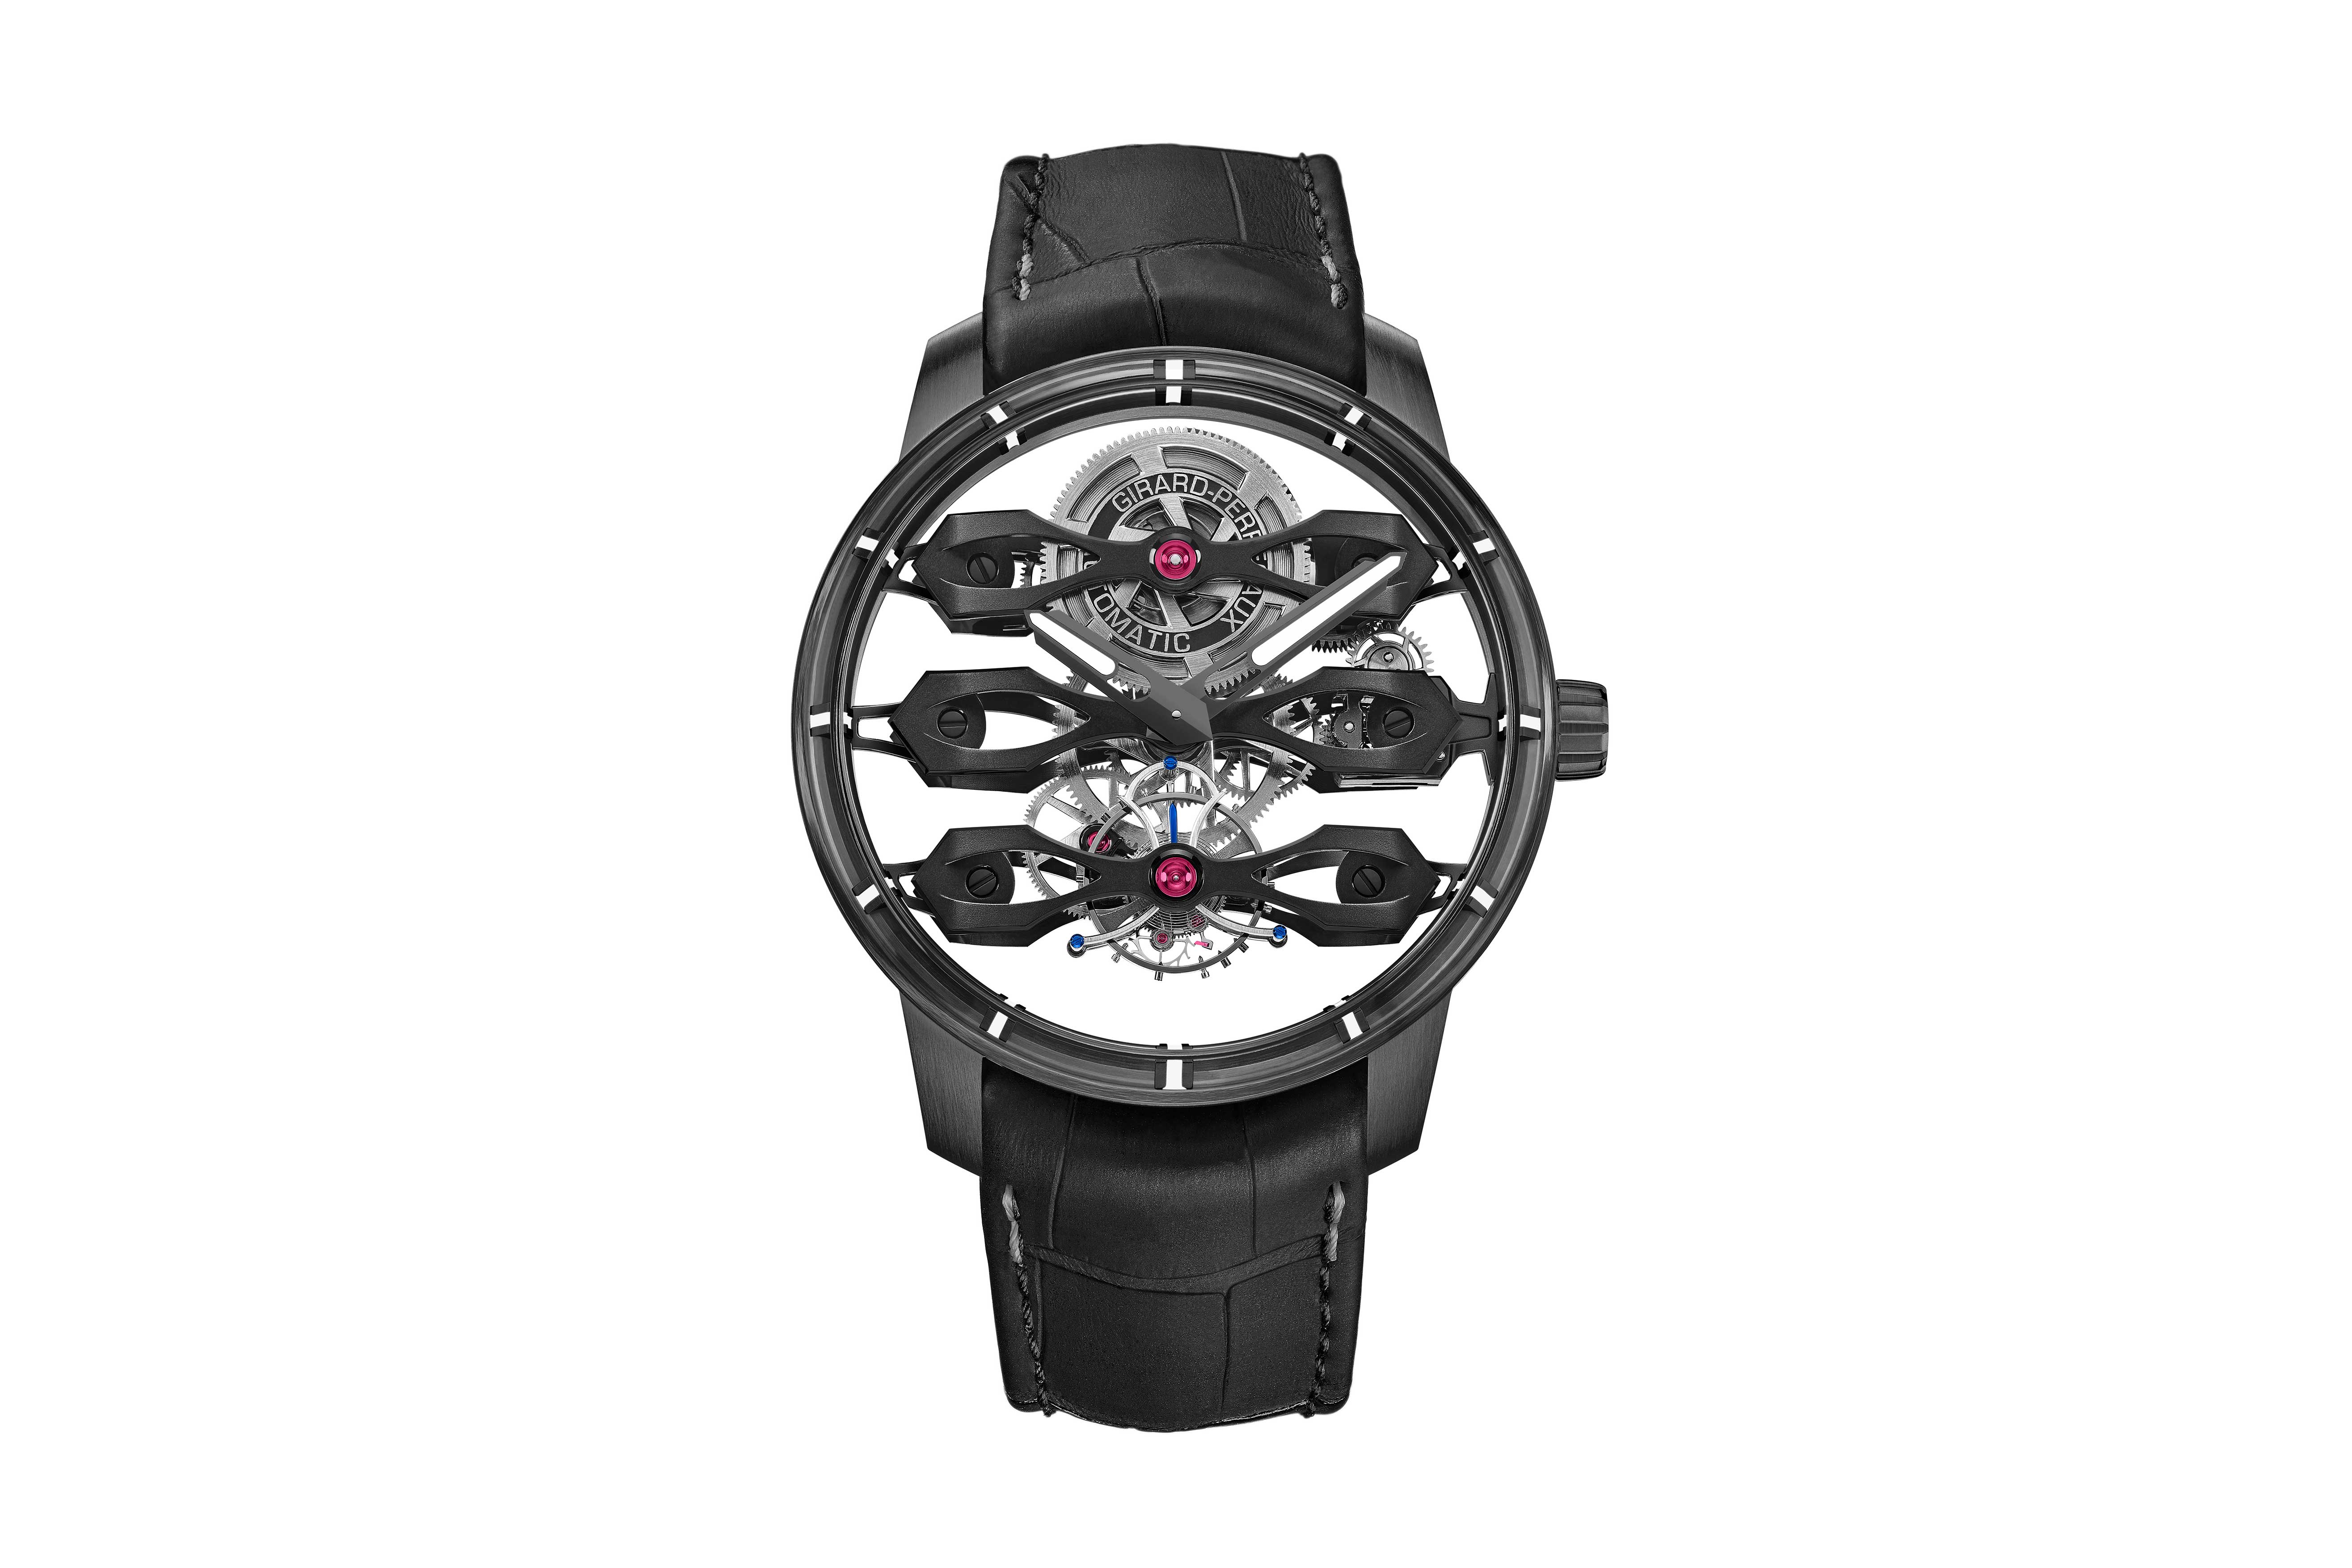 The Girard-Perregaux Tourbillon with Three Flying Bridges – Aston Martin Edition, seen here on the alligator strap with rubber effect fitted on triple folding buckle in grade 5 titanium with black DLC coating